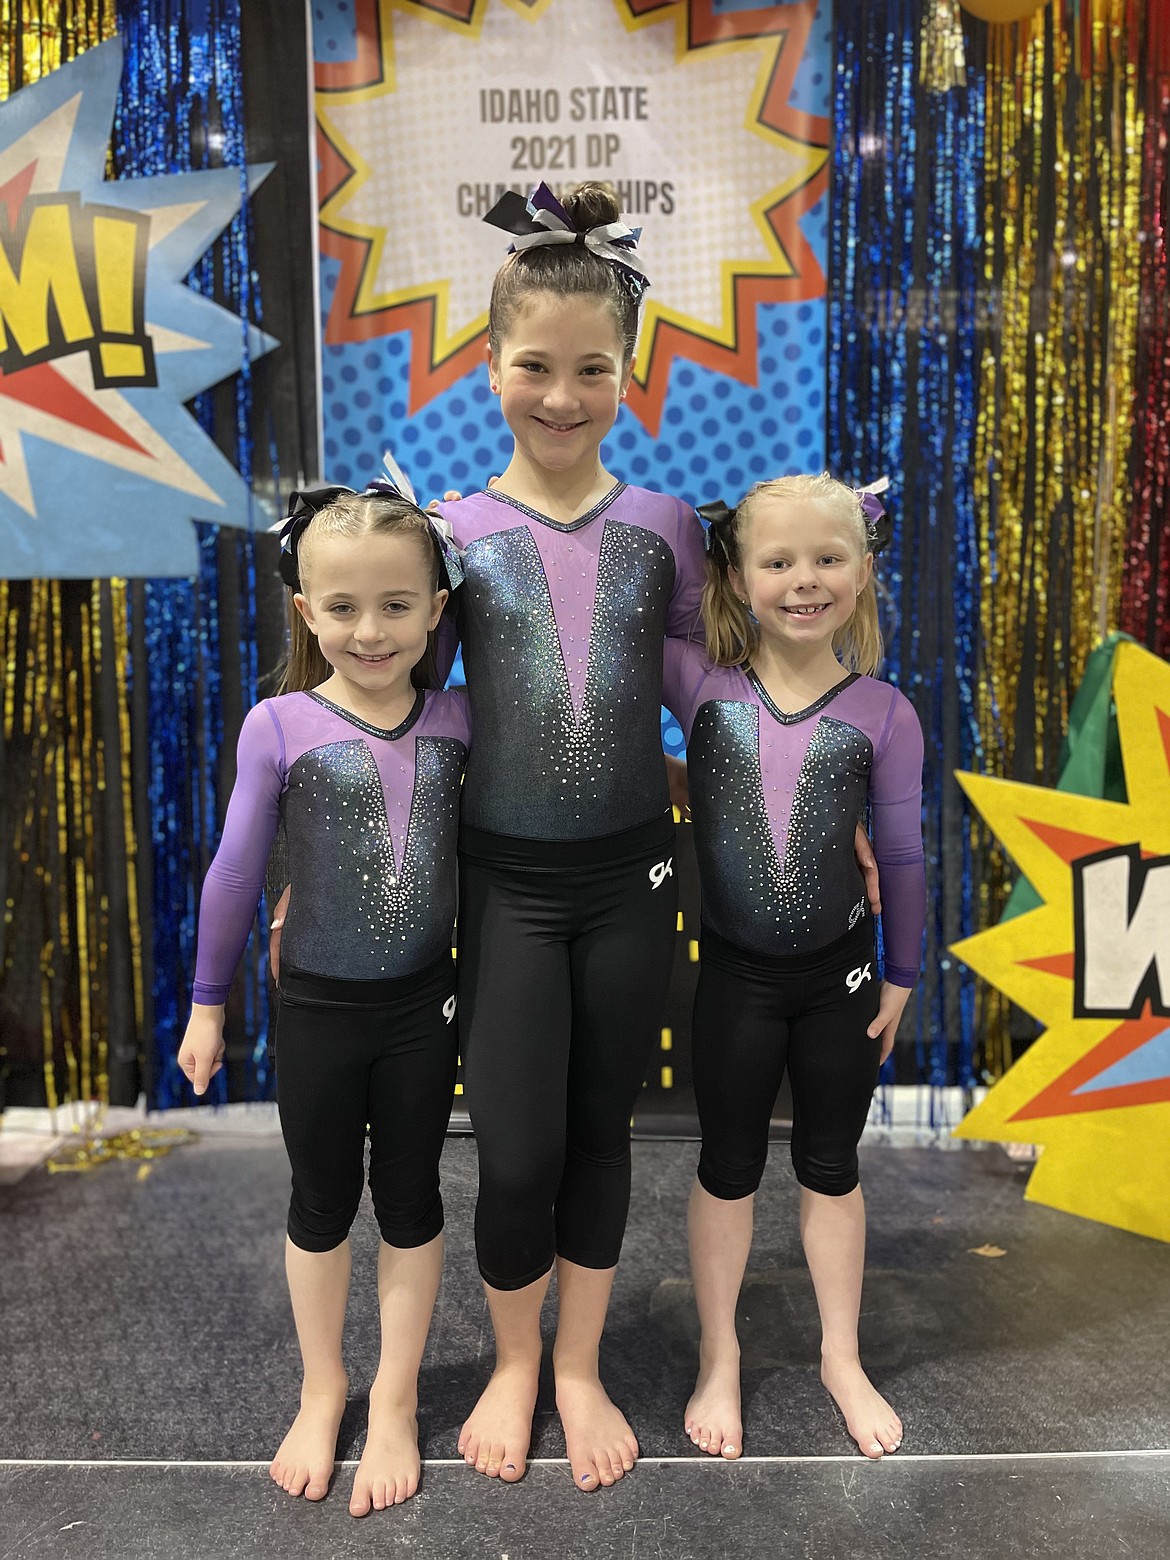 Courtesy photo
Avant Coeur Gymnastics Level 3 girls competed at the Idaho state championships at the Ford Idaho Center in Nampa. From left are Sydney Traub, Audri Madsen and Kaylee Flodin.